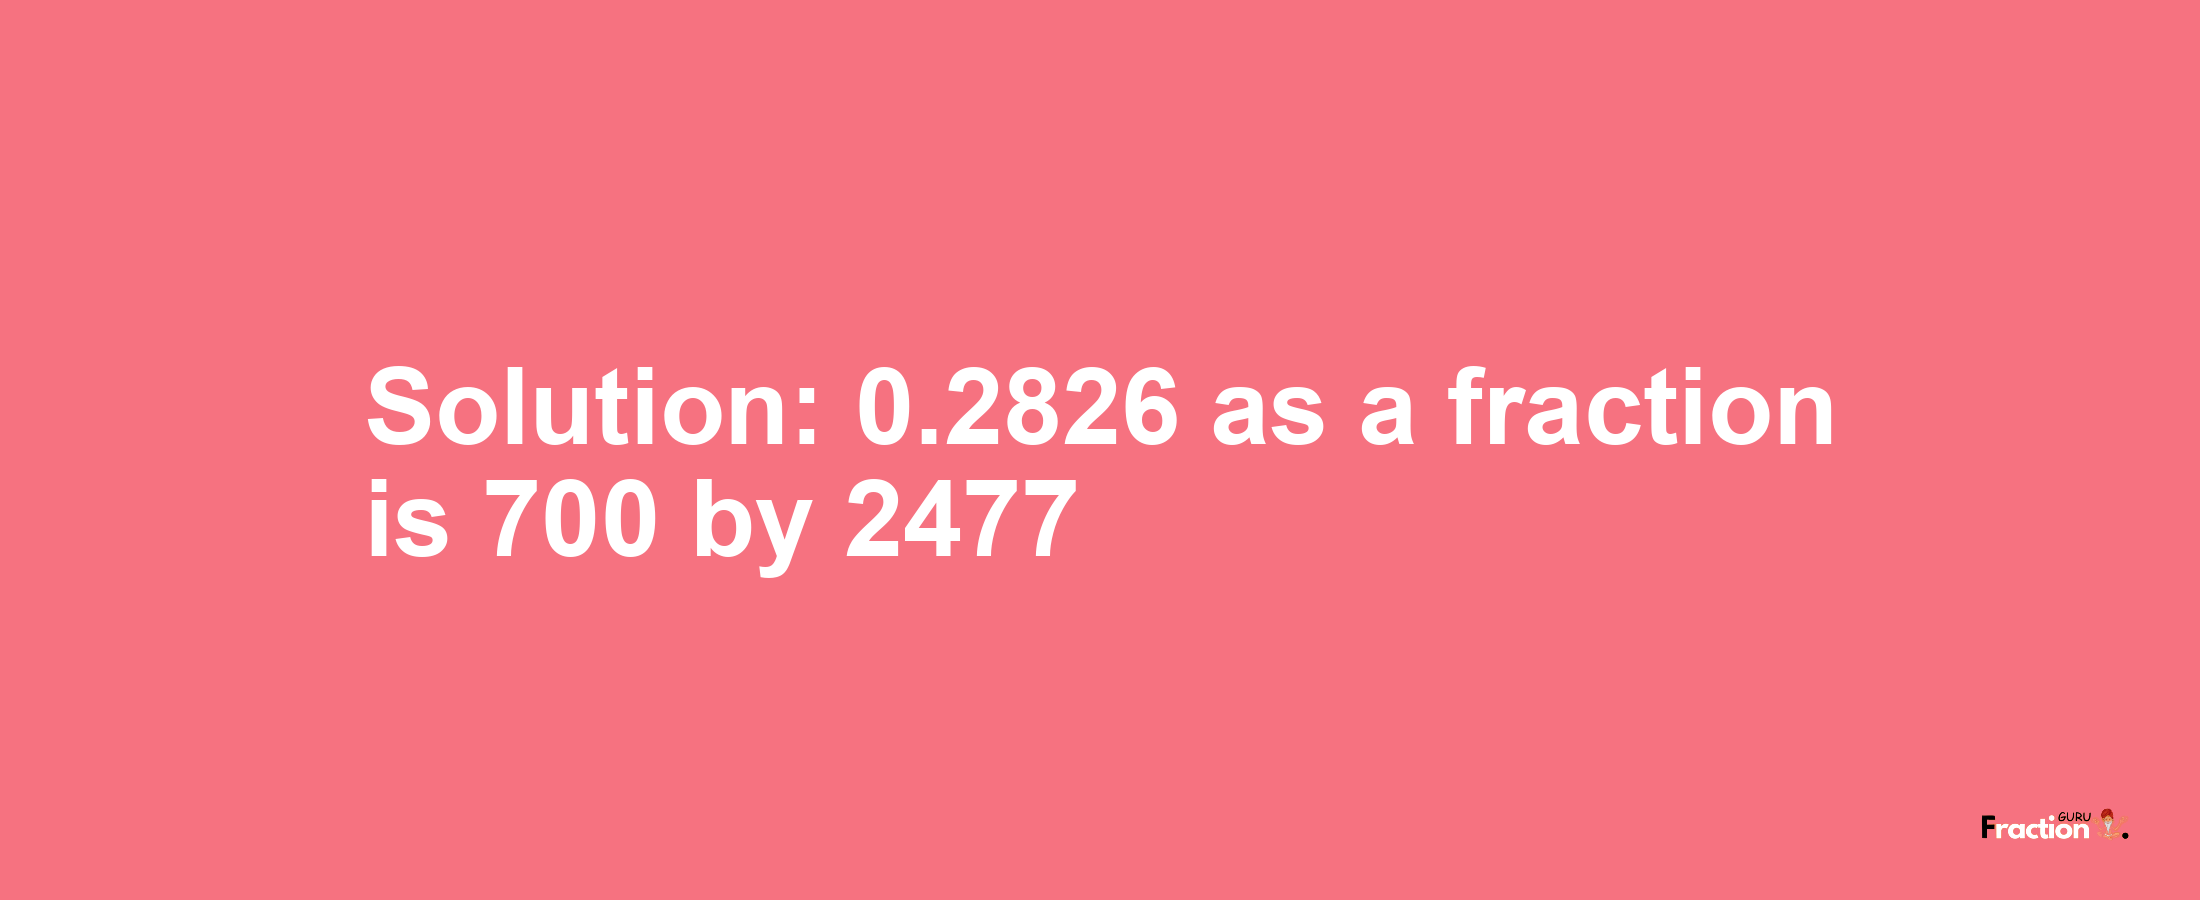 Solution:0.2826 as a fraction is 700/2477